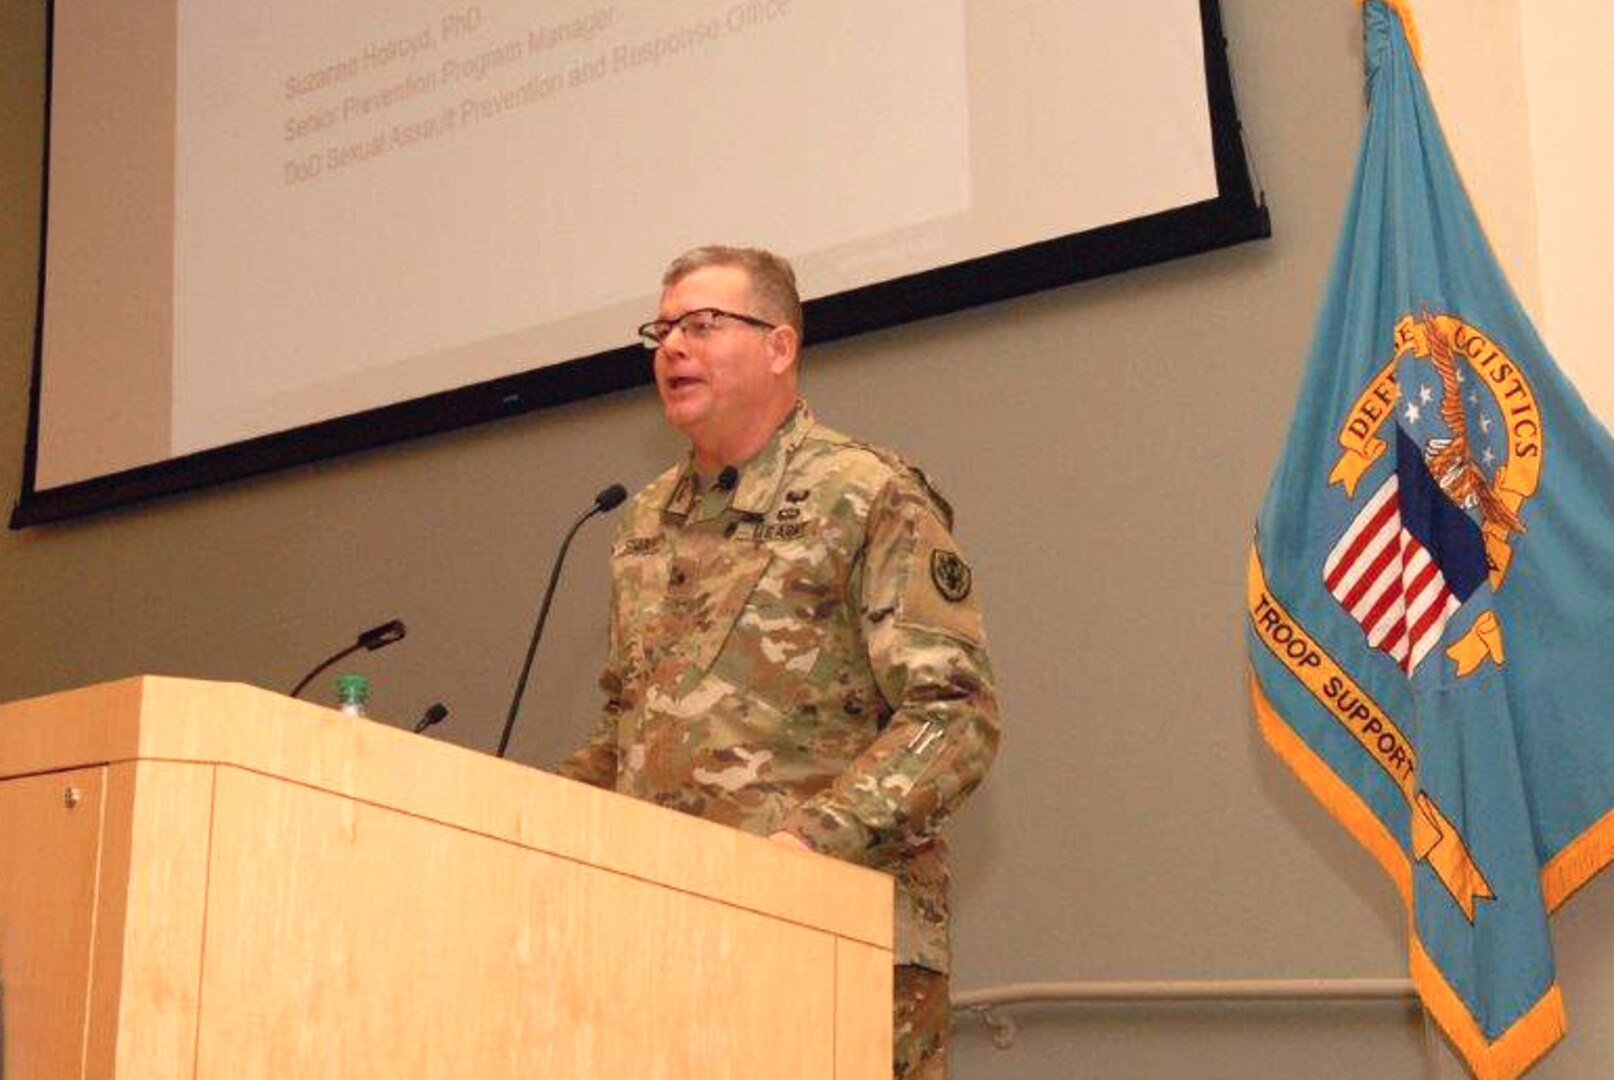 Army Brig. Gen. Mark Simerly provides introductory remarks during a Sexual Assault Response and Prevention Summit at the Defense Logistics Agency Troop Support in Philadelphia on March 1.